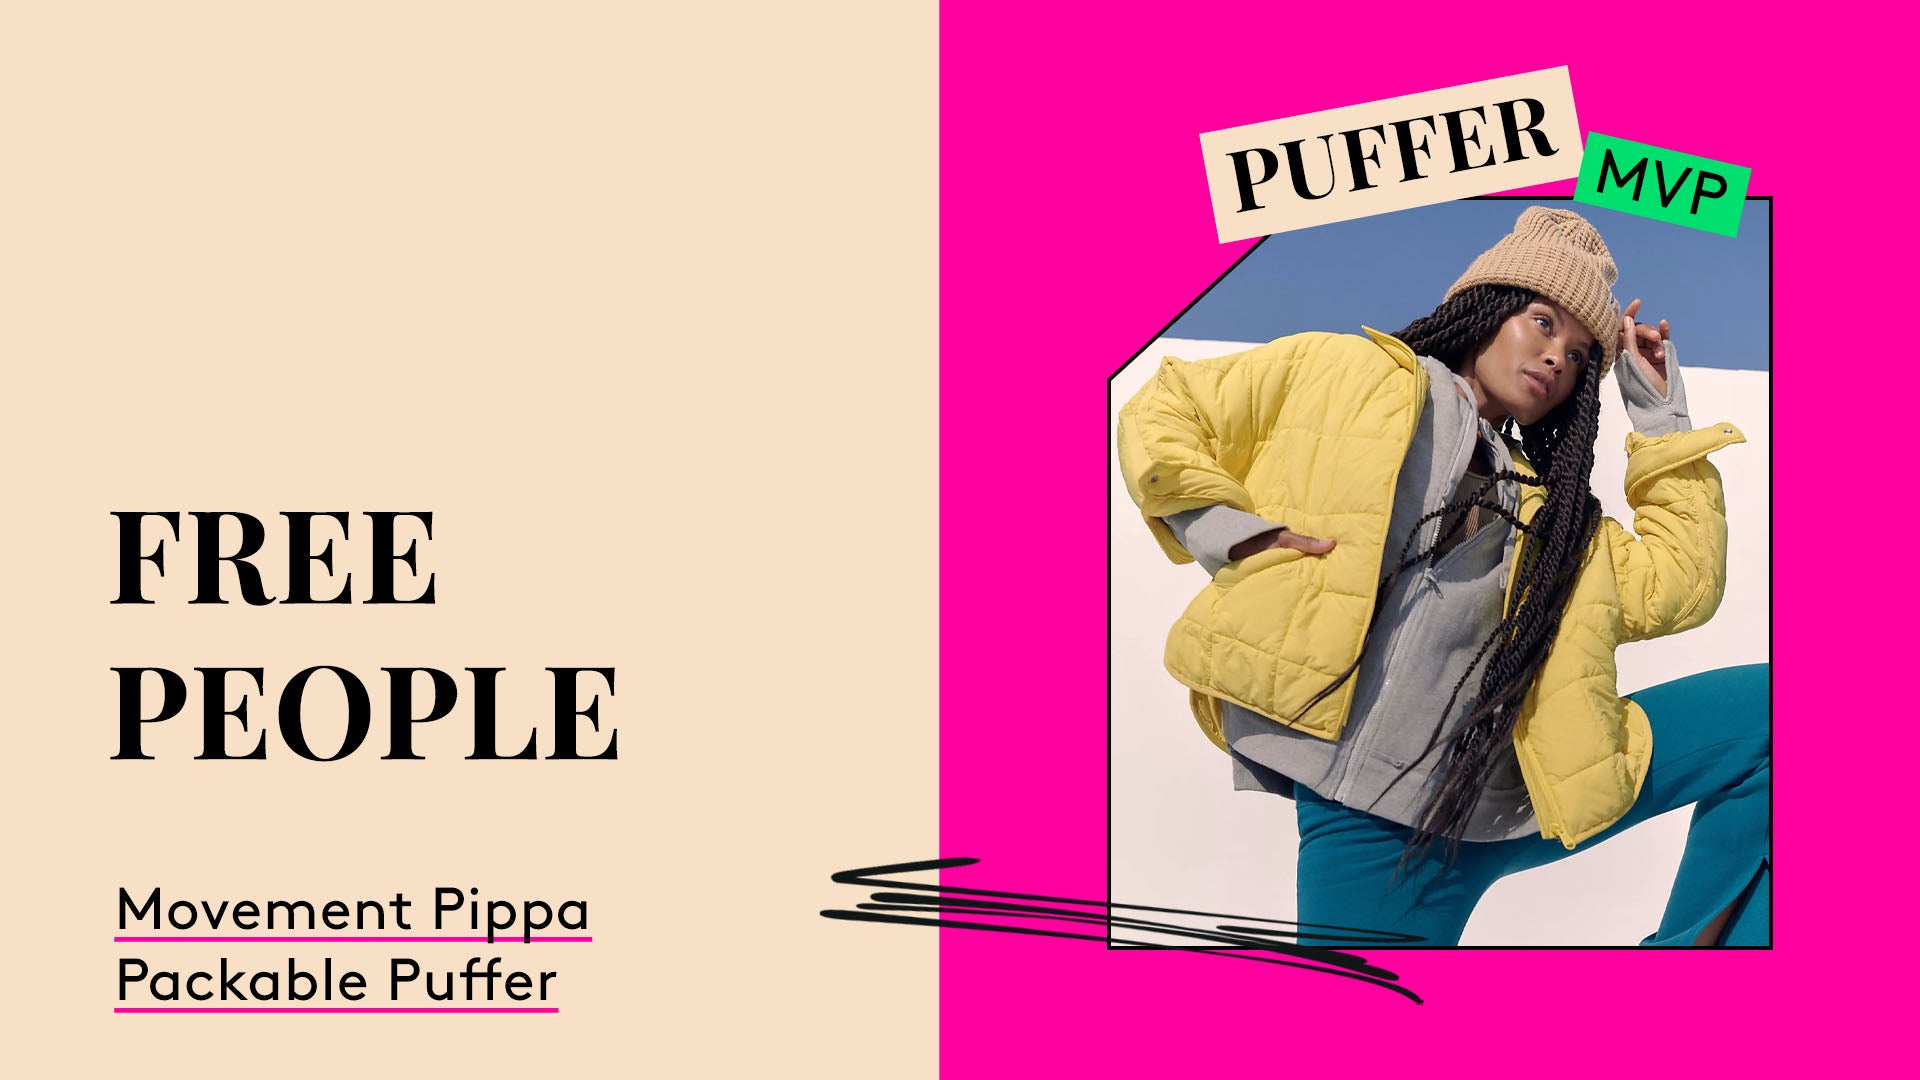 Puffer MVP. Free People Movement Pippa Packable Puffer.